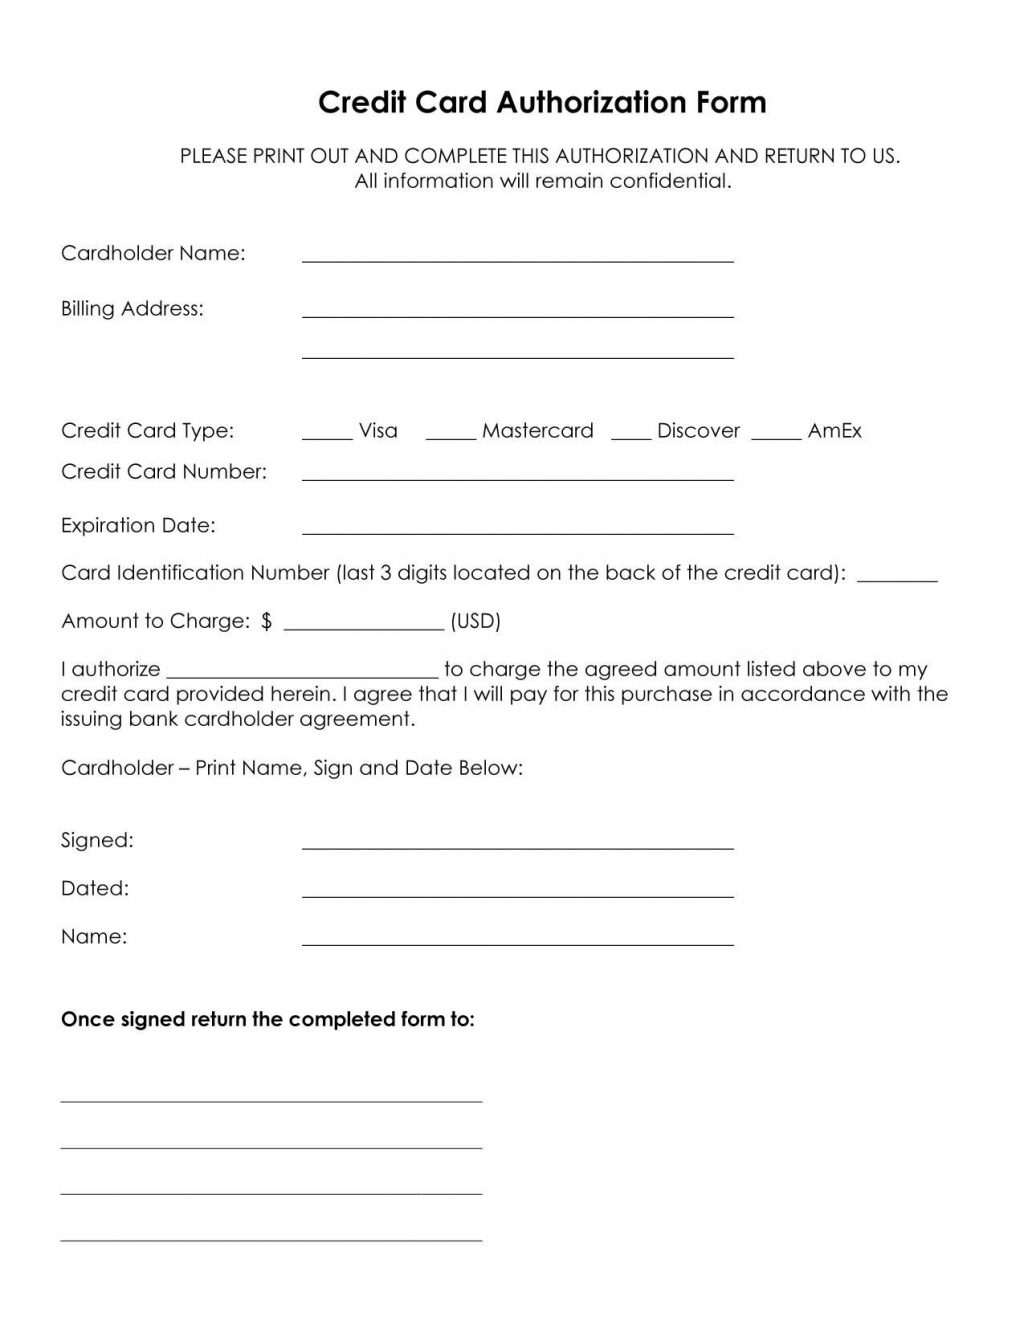 Credit Card Authorization Form Template In For Hotel In Hotel Credit Card Authorization Form Template